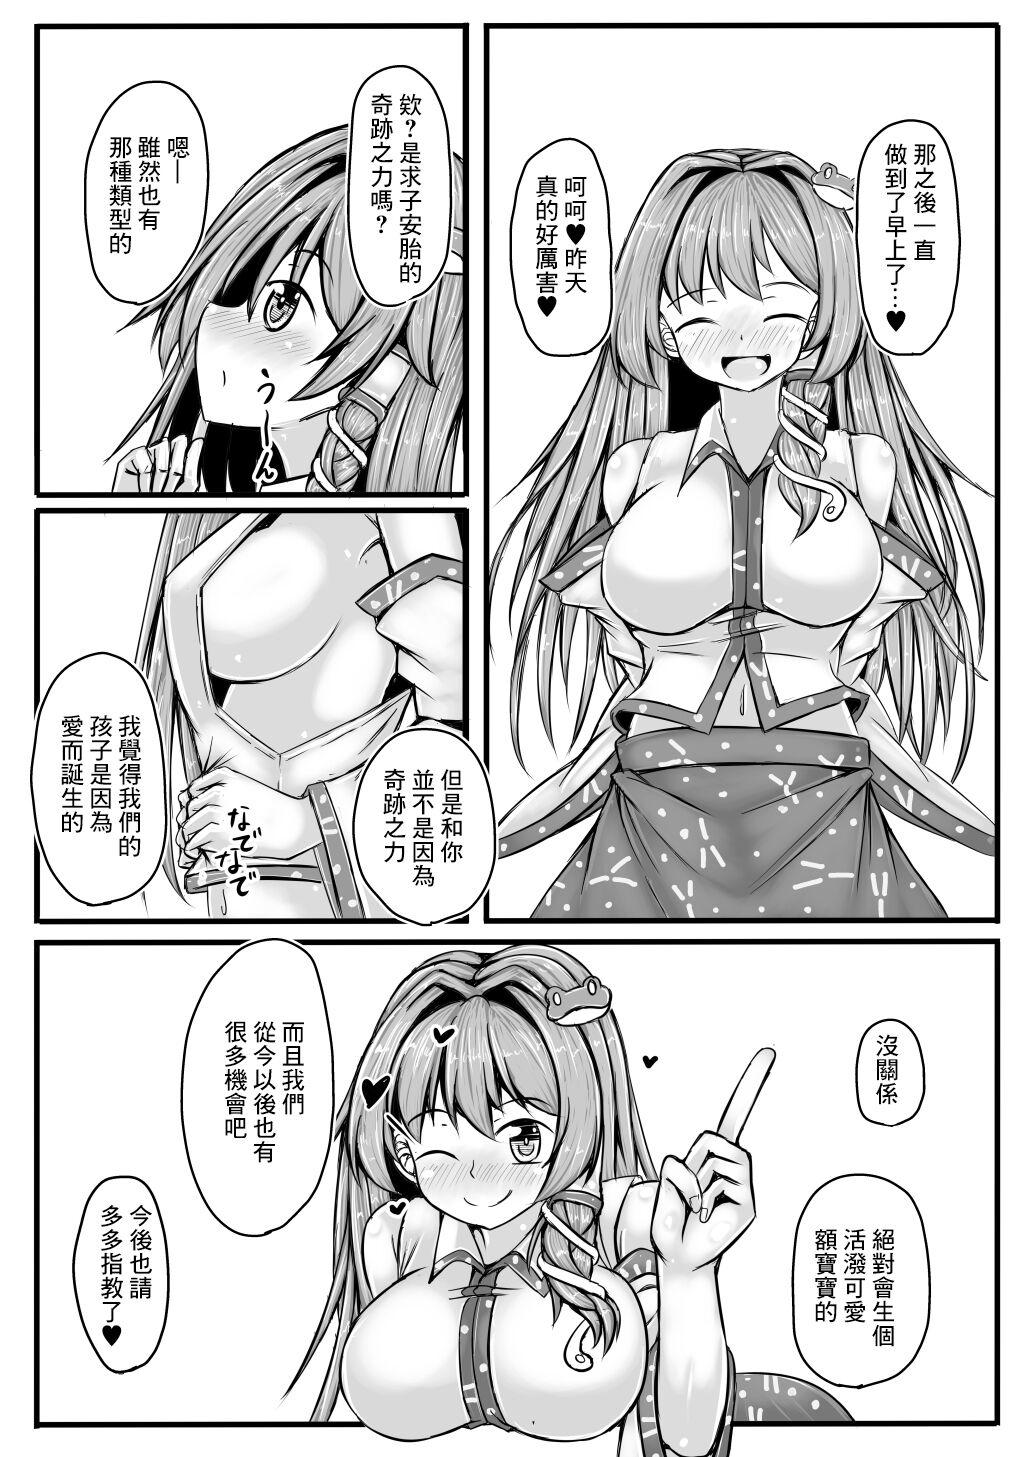 Mamadas 早苗さんと元気になるえっちするコピ本 - Touhou project Eurobabe - Page 6